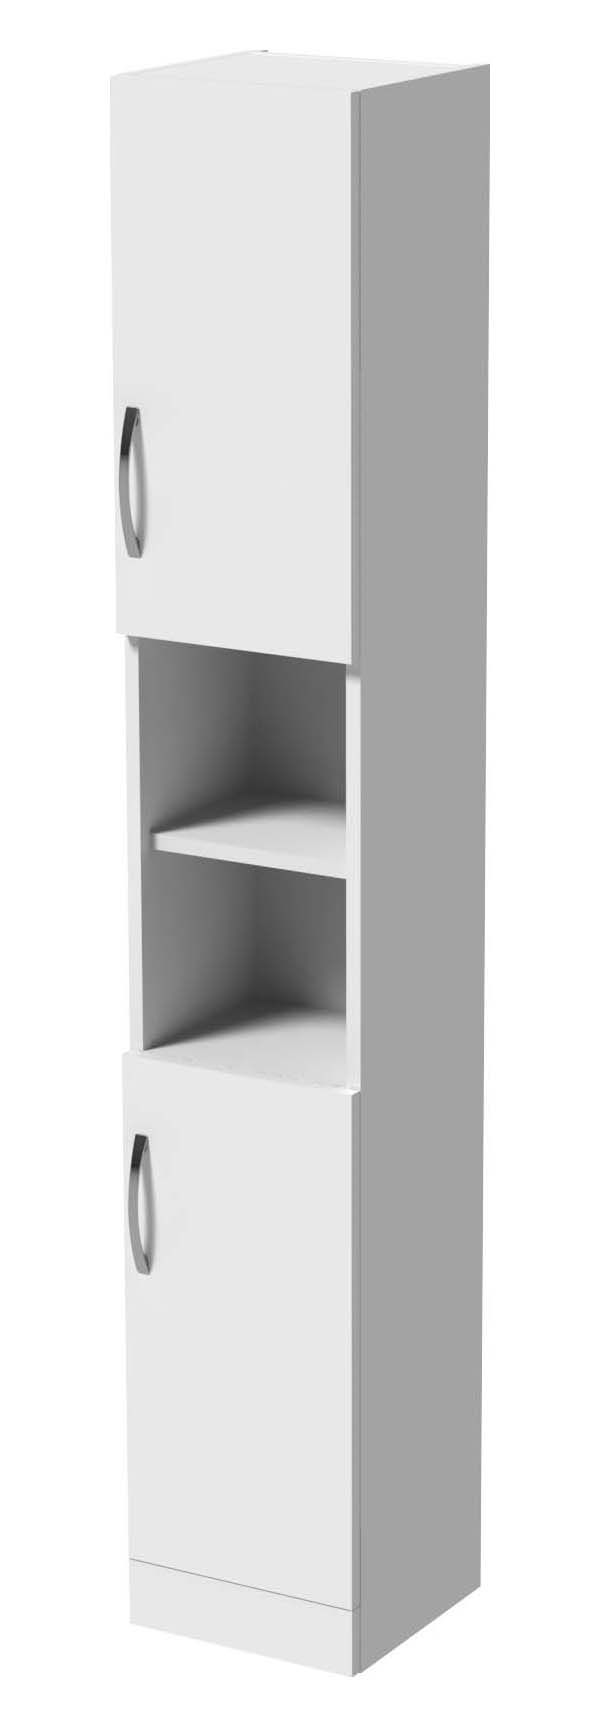 Image of Wickes White Gloss Tall Tower Storage Unit - 1800 x 300mm